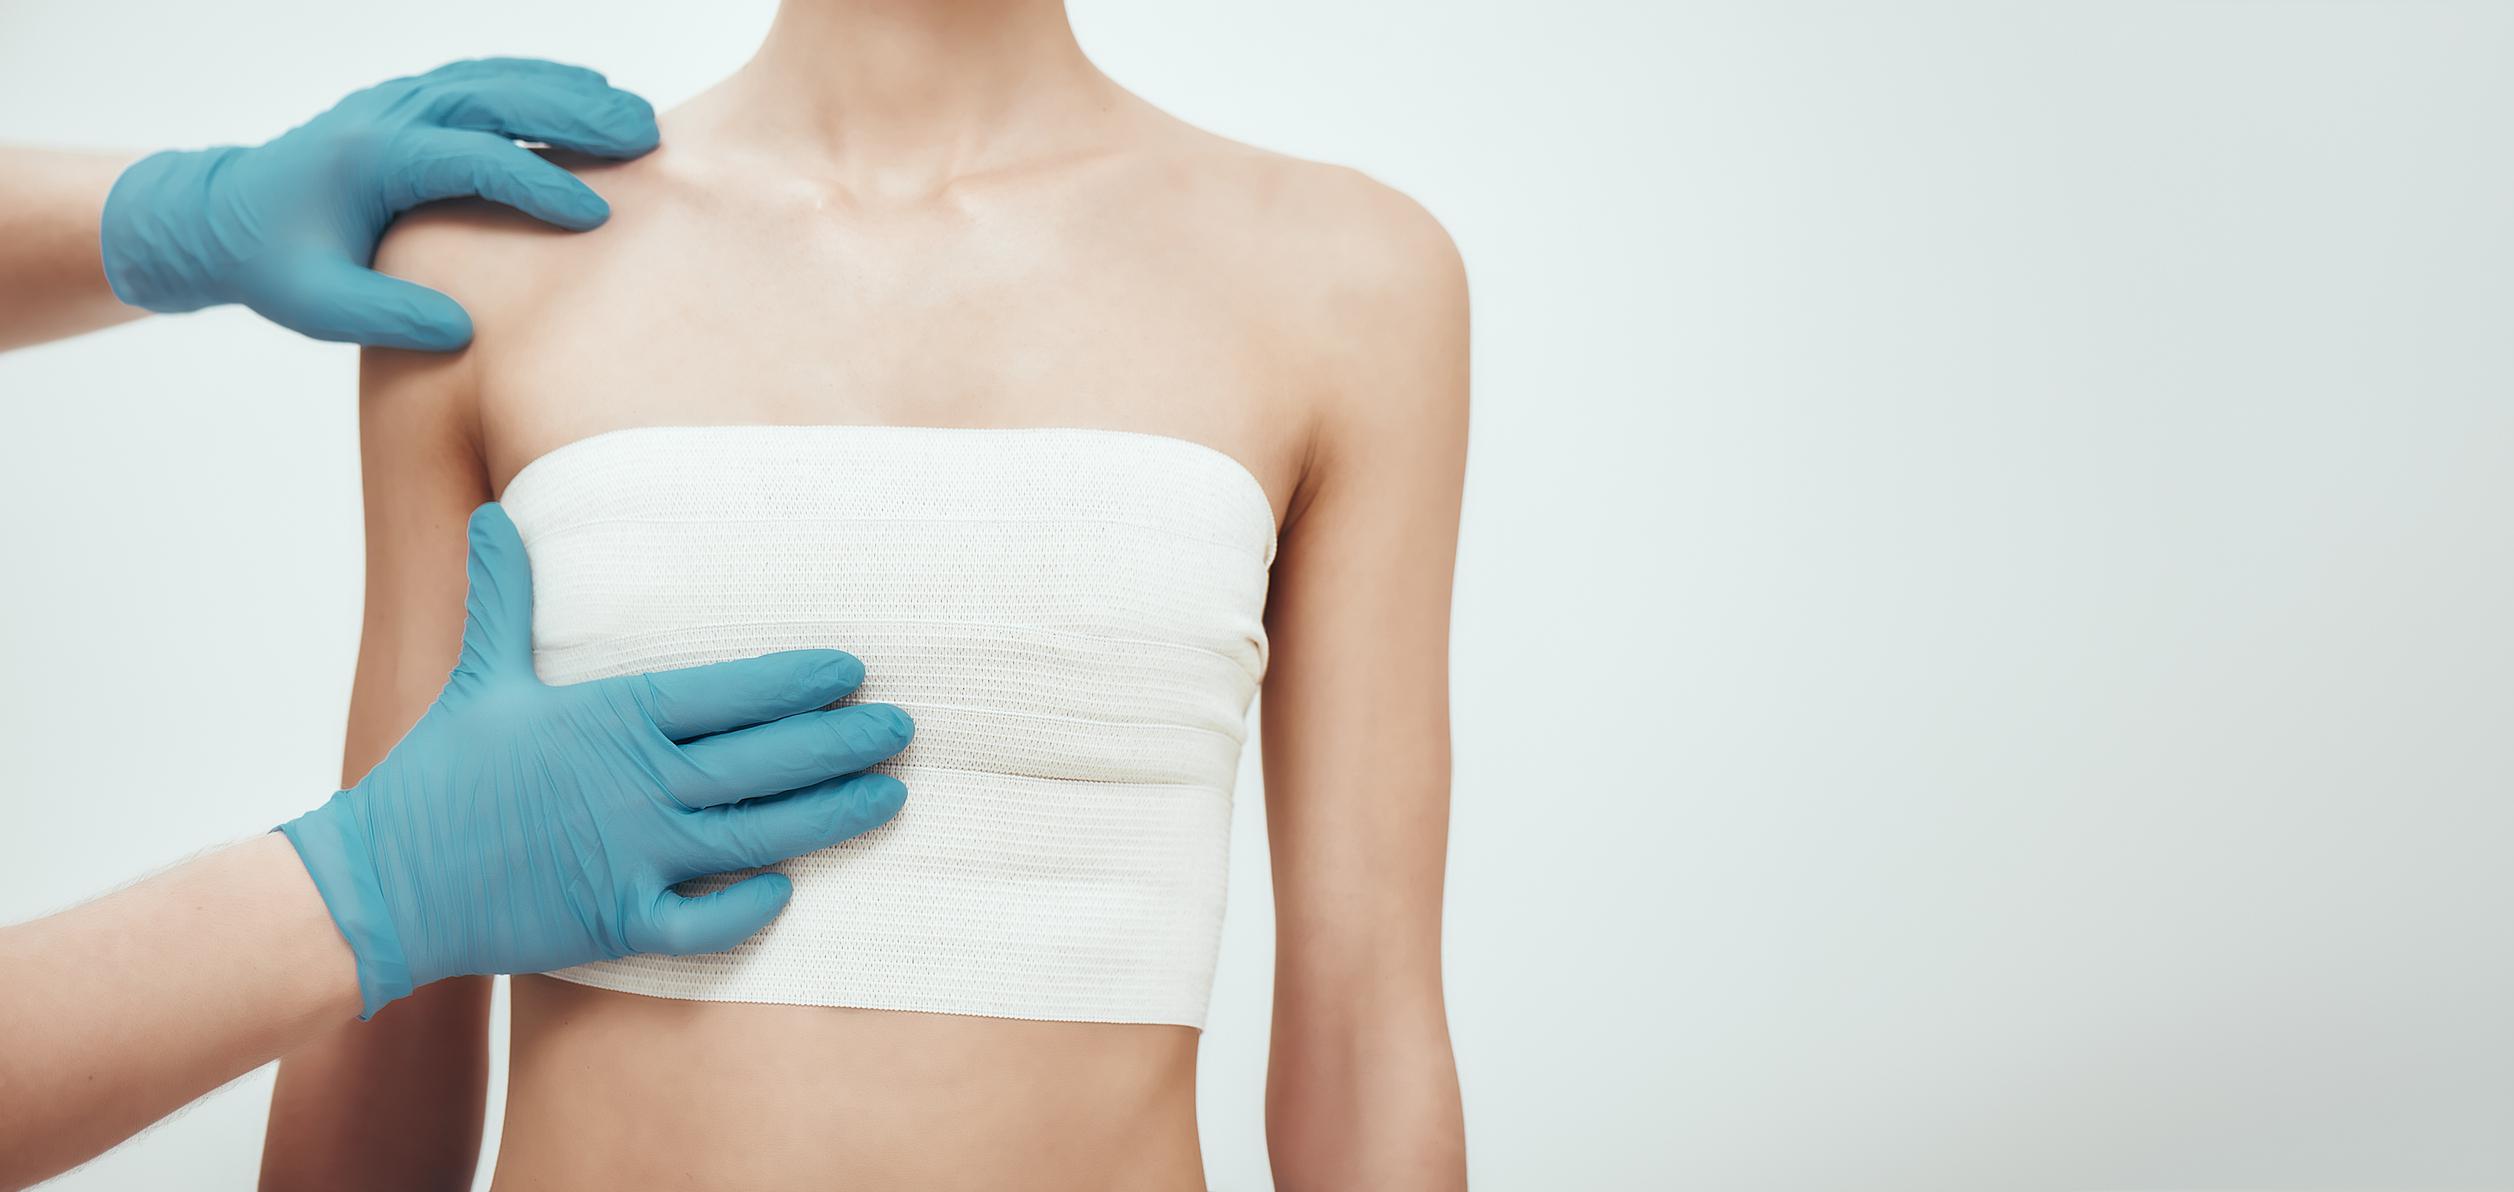 Women Talk About Overcoming Numbness After Mastectomy